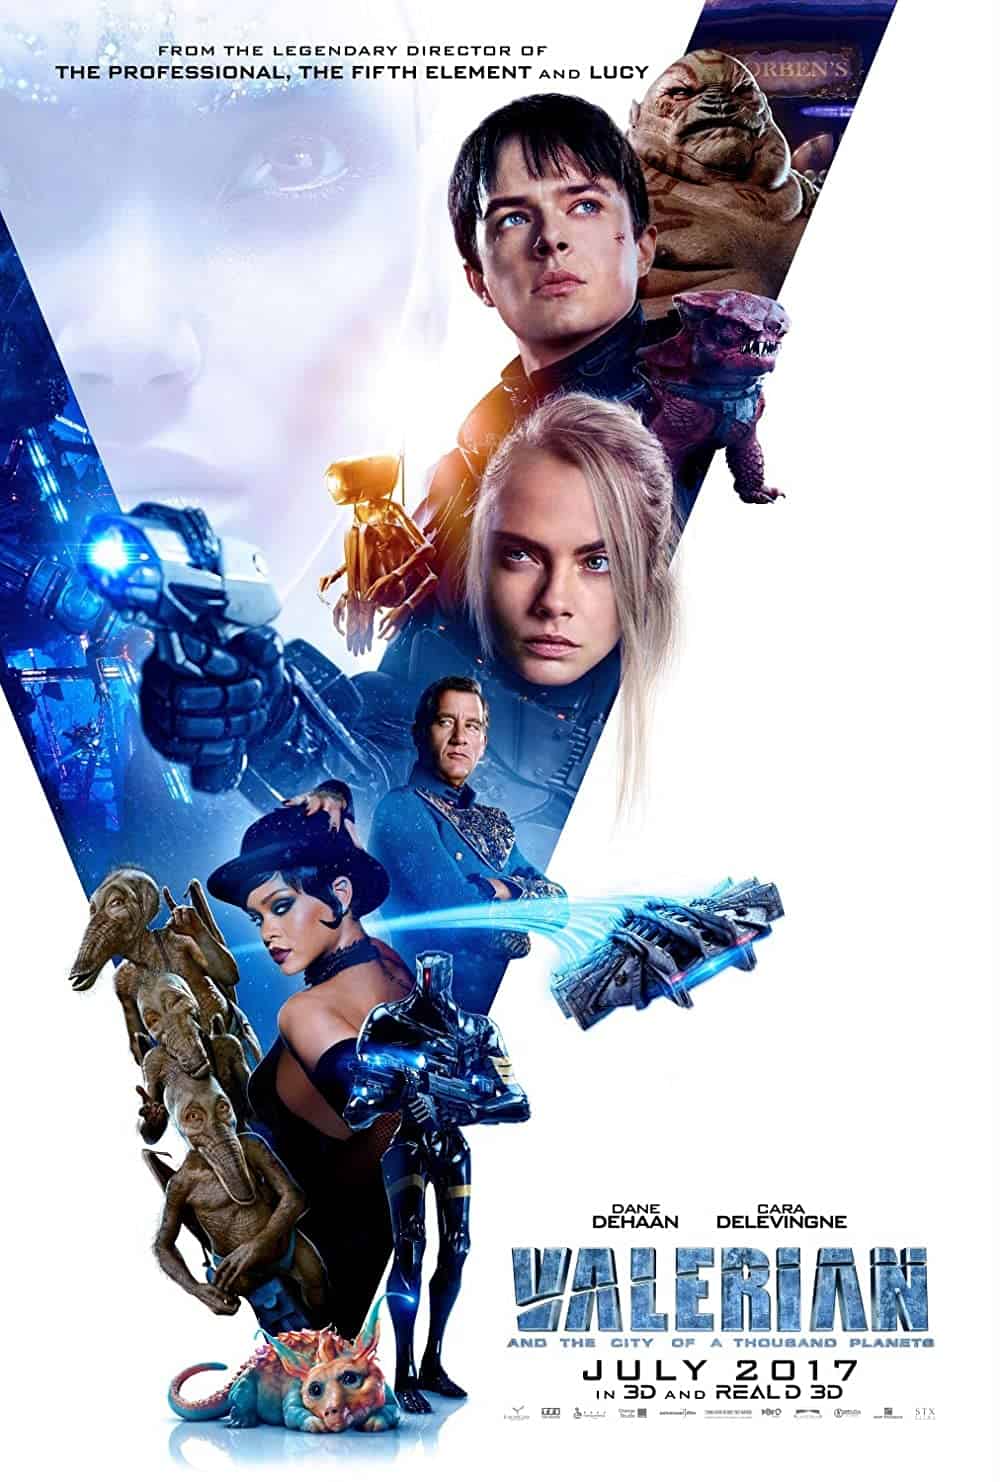 movie similar to Avatar Valerian And The City of a Thousand Planets (2017)